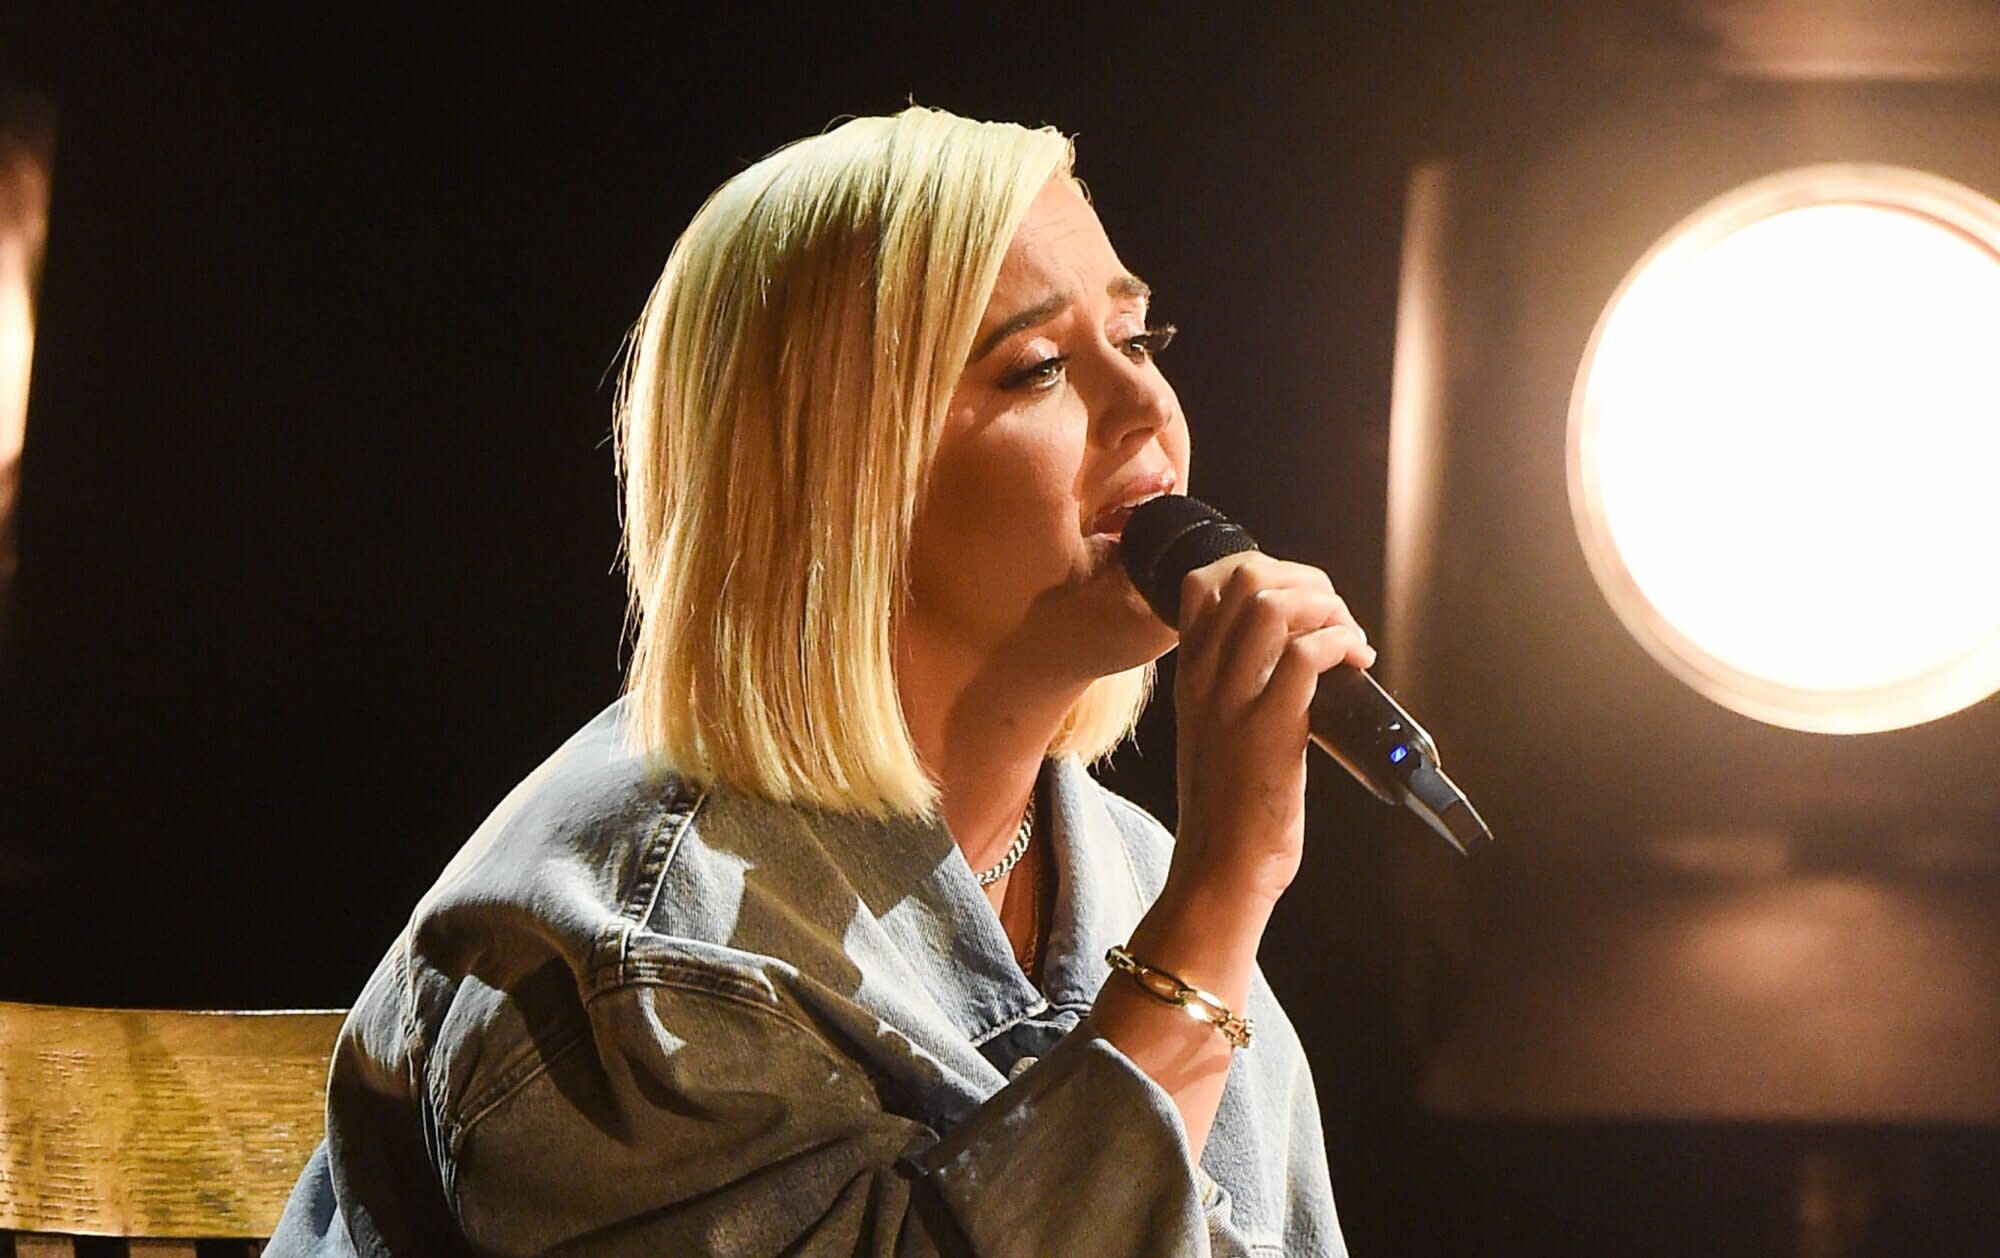 Katy Perry Gave Her First Postpartum Performance At The Amas And It Was So Emotional